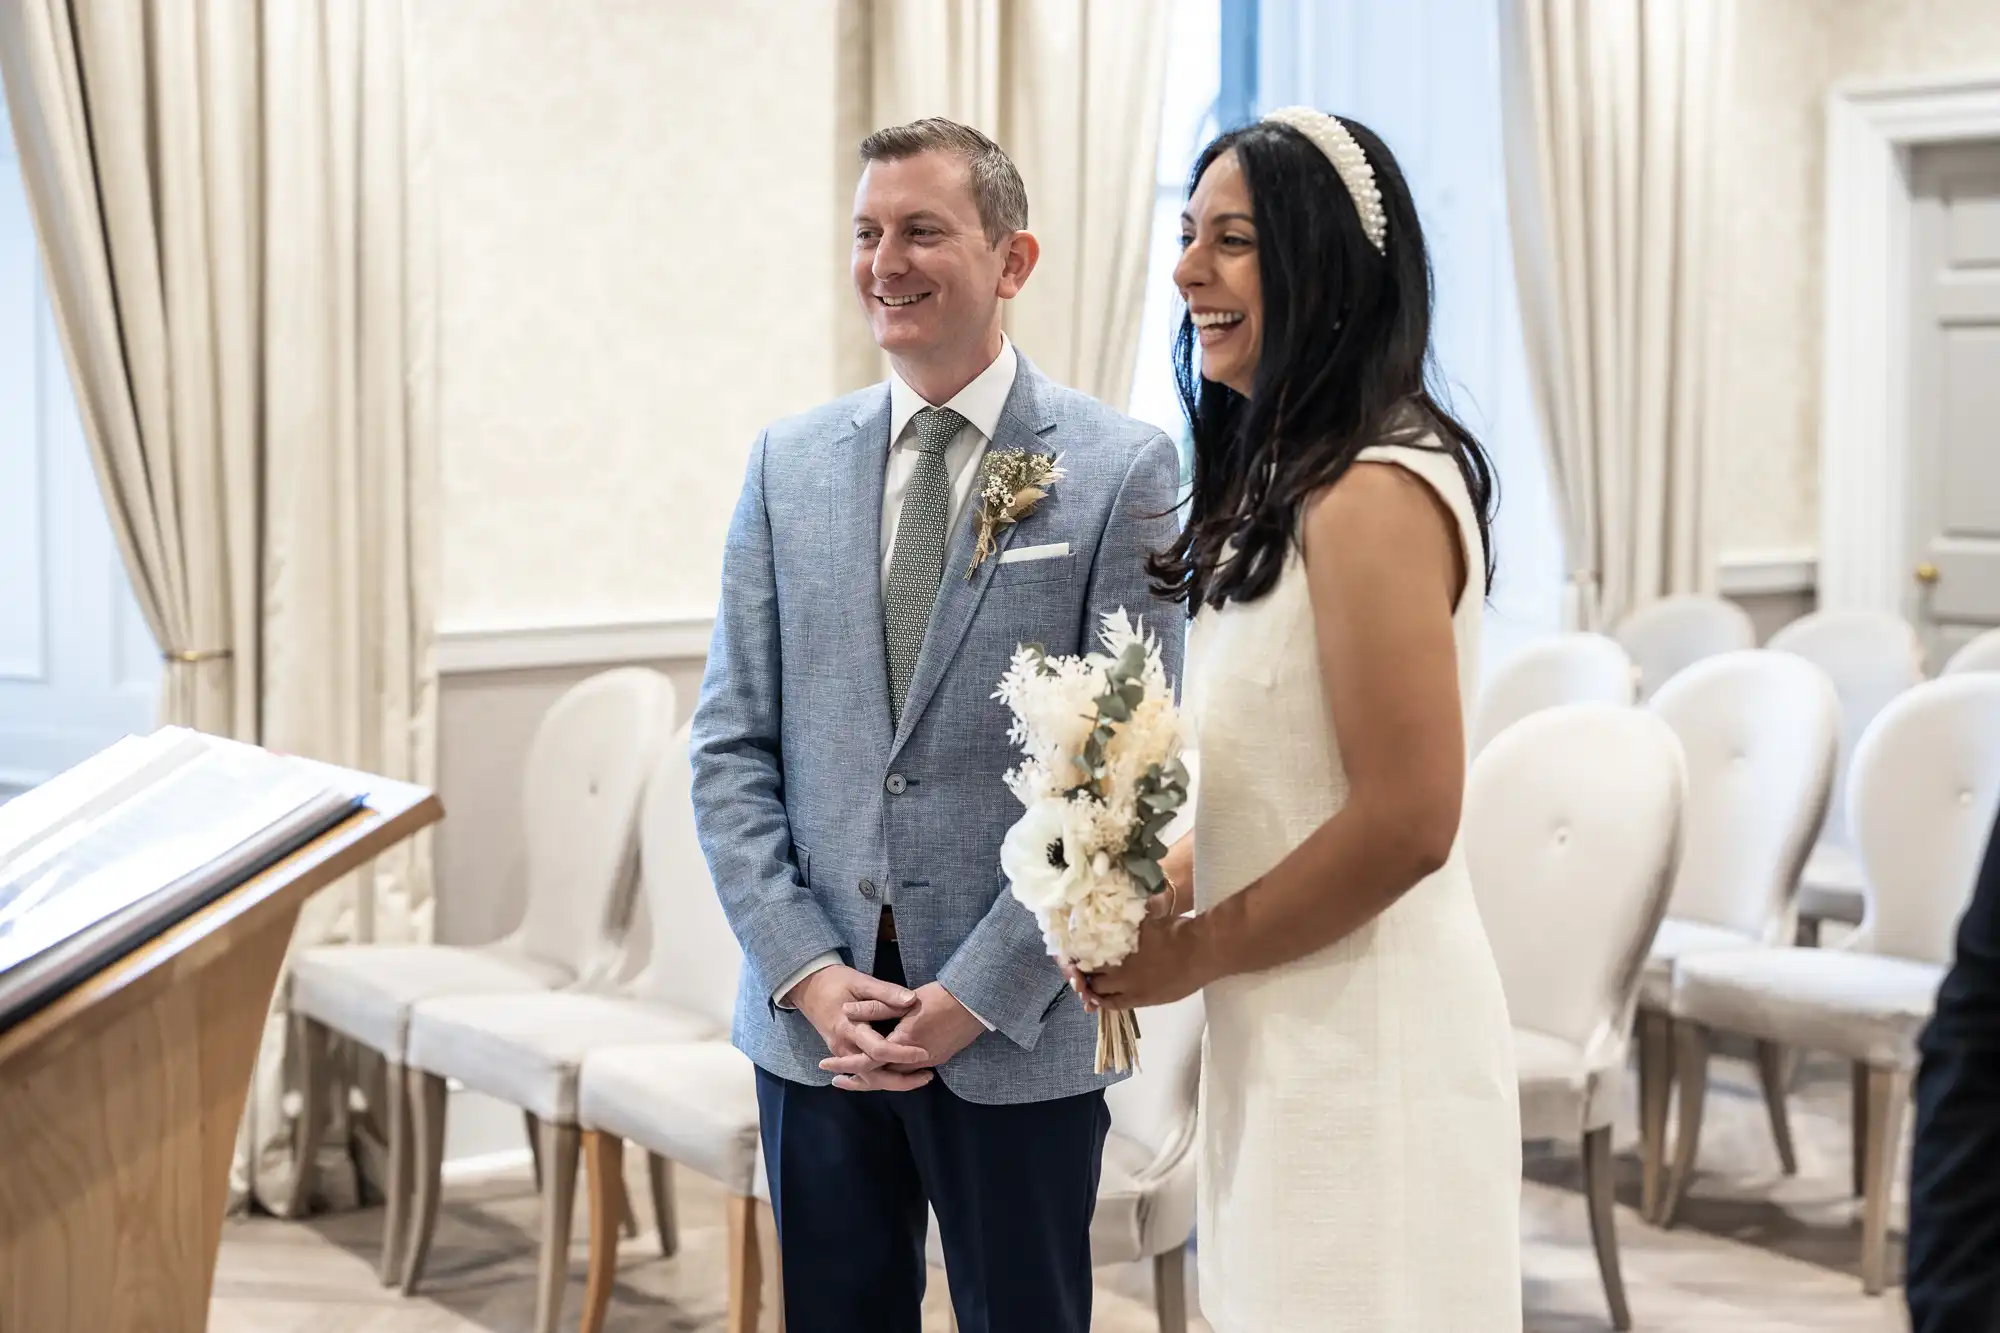 A couple stands together smiling in a small, elegantly decorated room, the woman holding a bouquet of flowers, likely during a civil wedding ceremony.